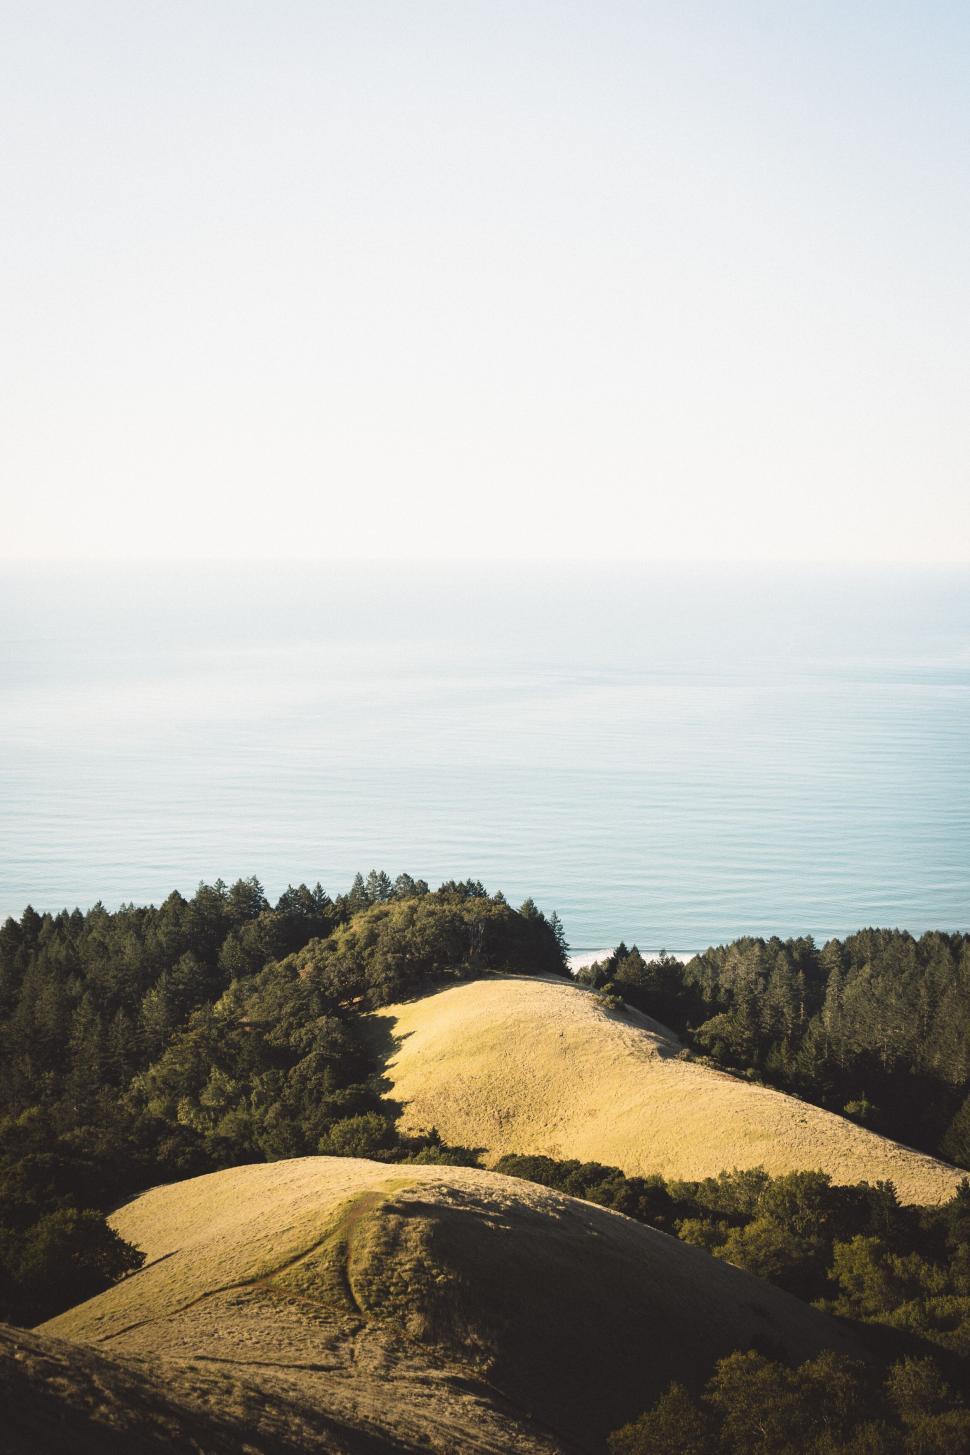 Free Image of Hill with trees overlooking the ocean 